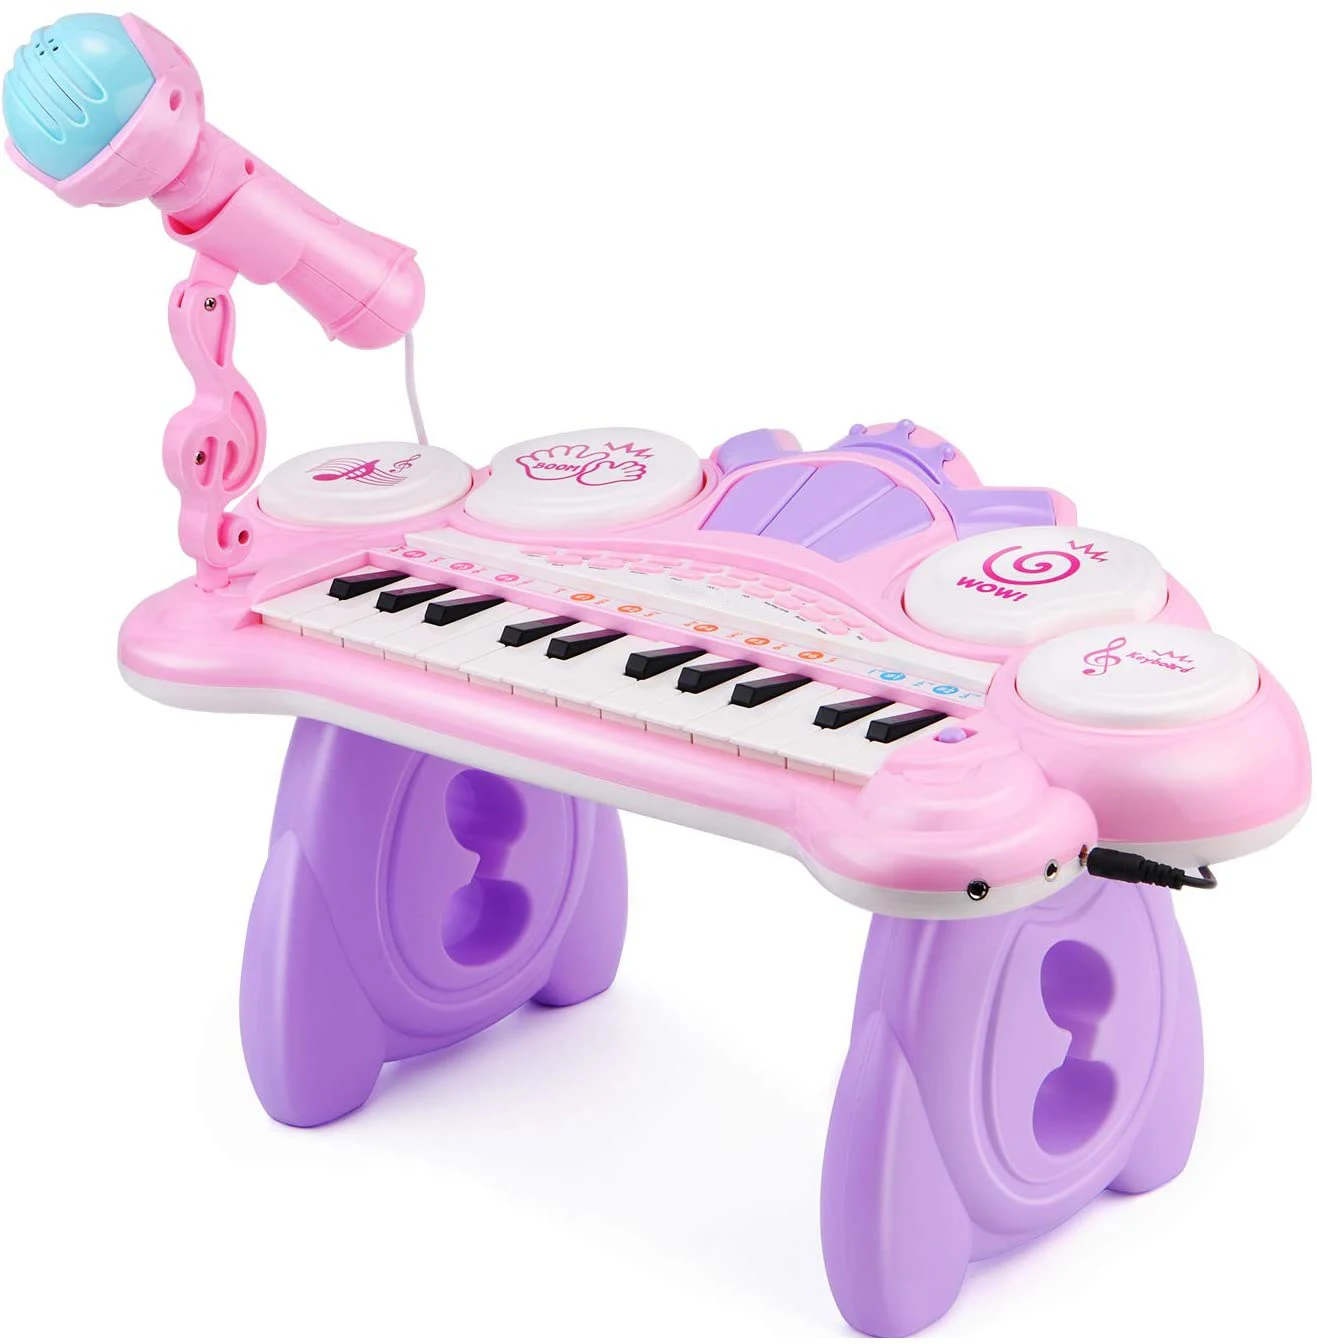 Demo Songs Blue Microphone Best Choice Products 24-Key Kids Toddler Educational Learning Musical Electronic Keyboard w/ Lights Teaching Mode Drums MP3 